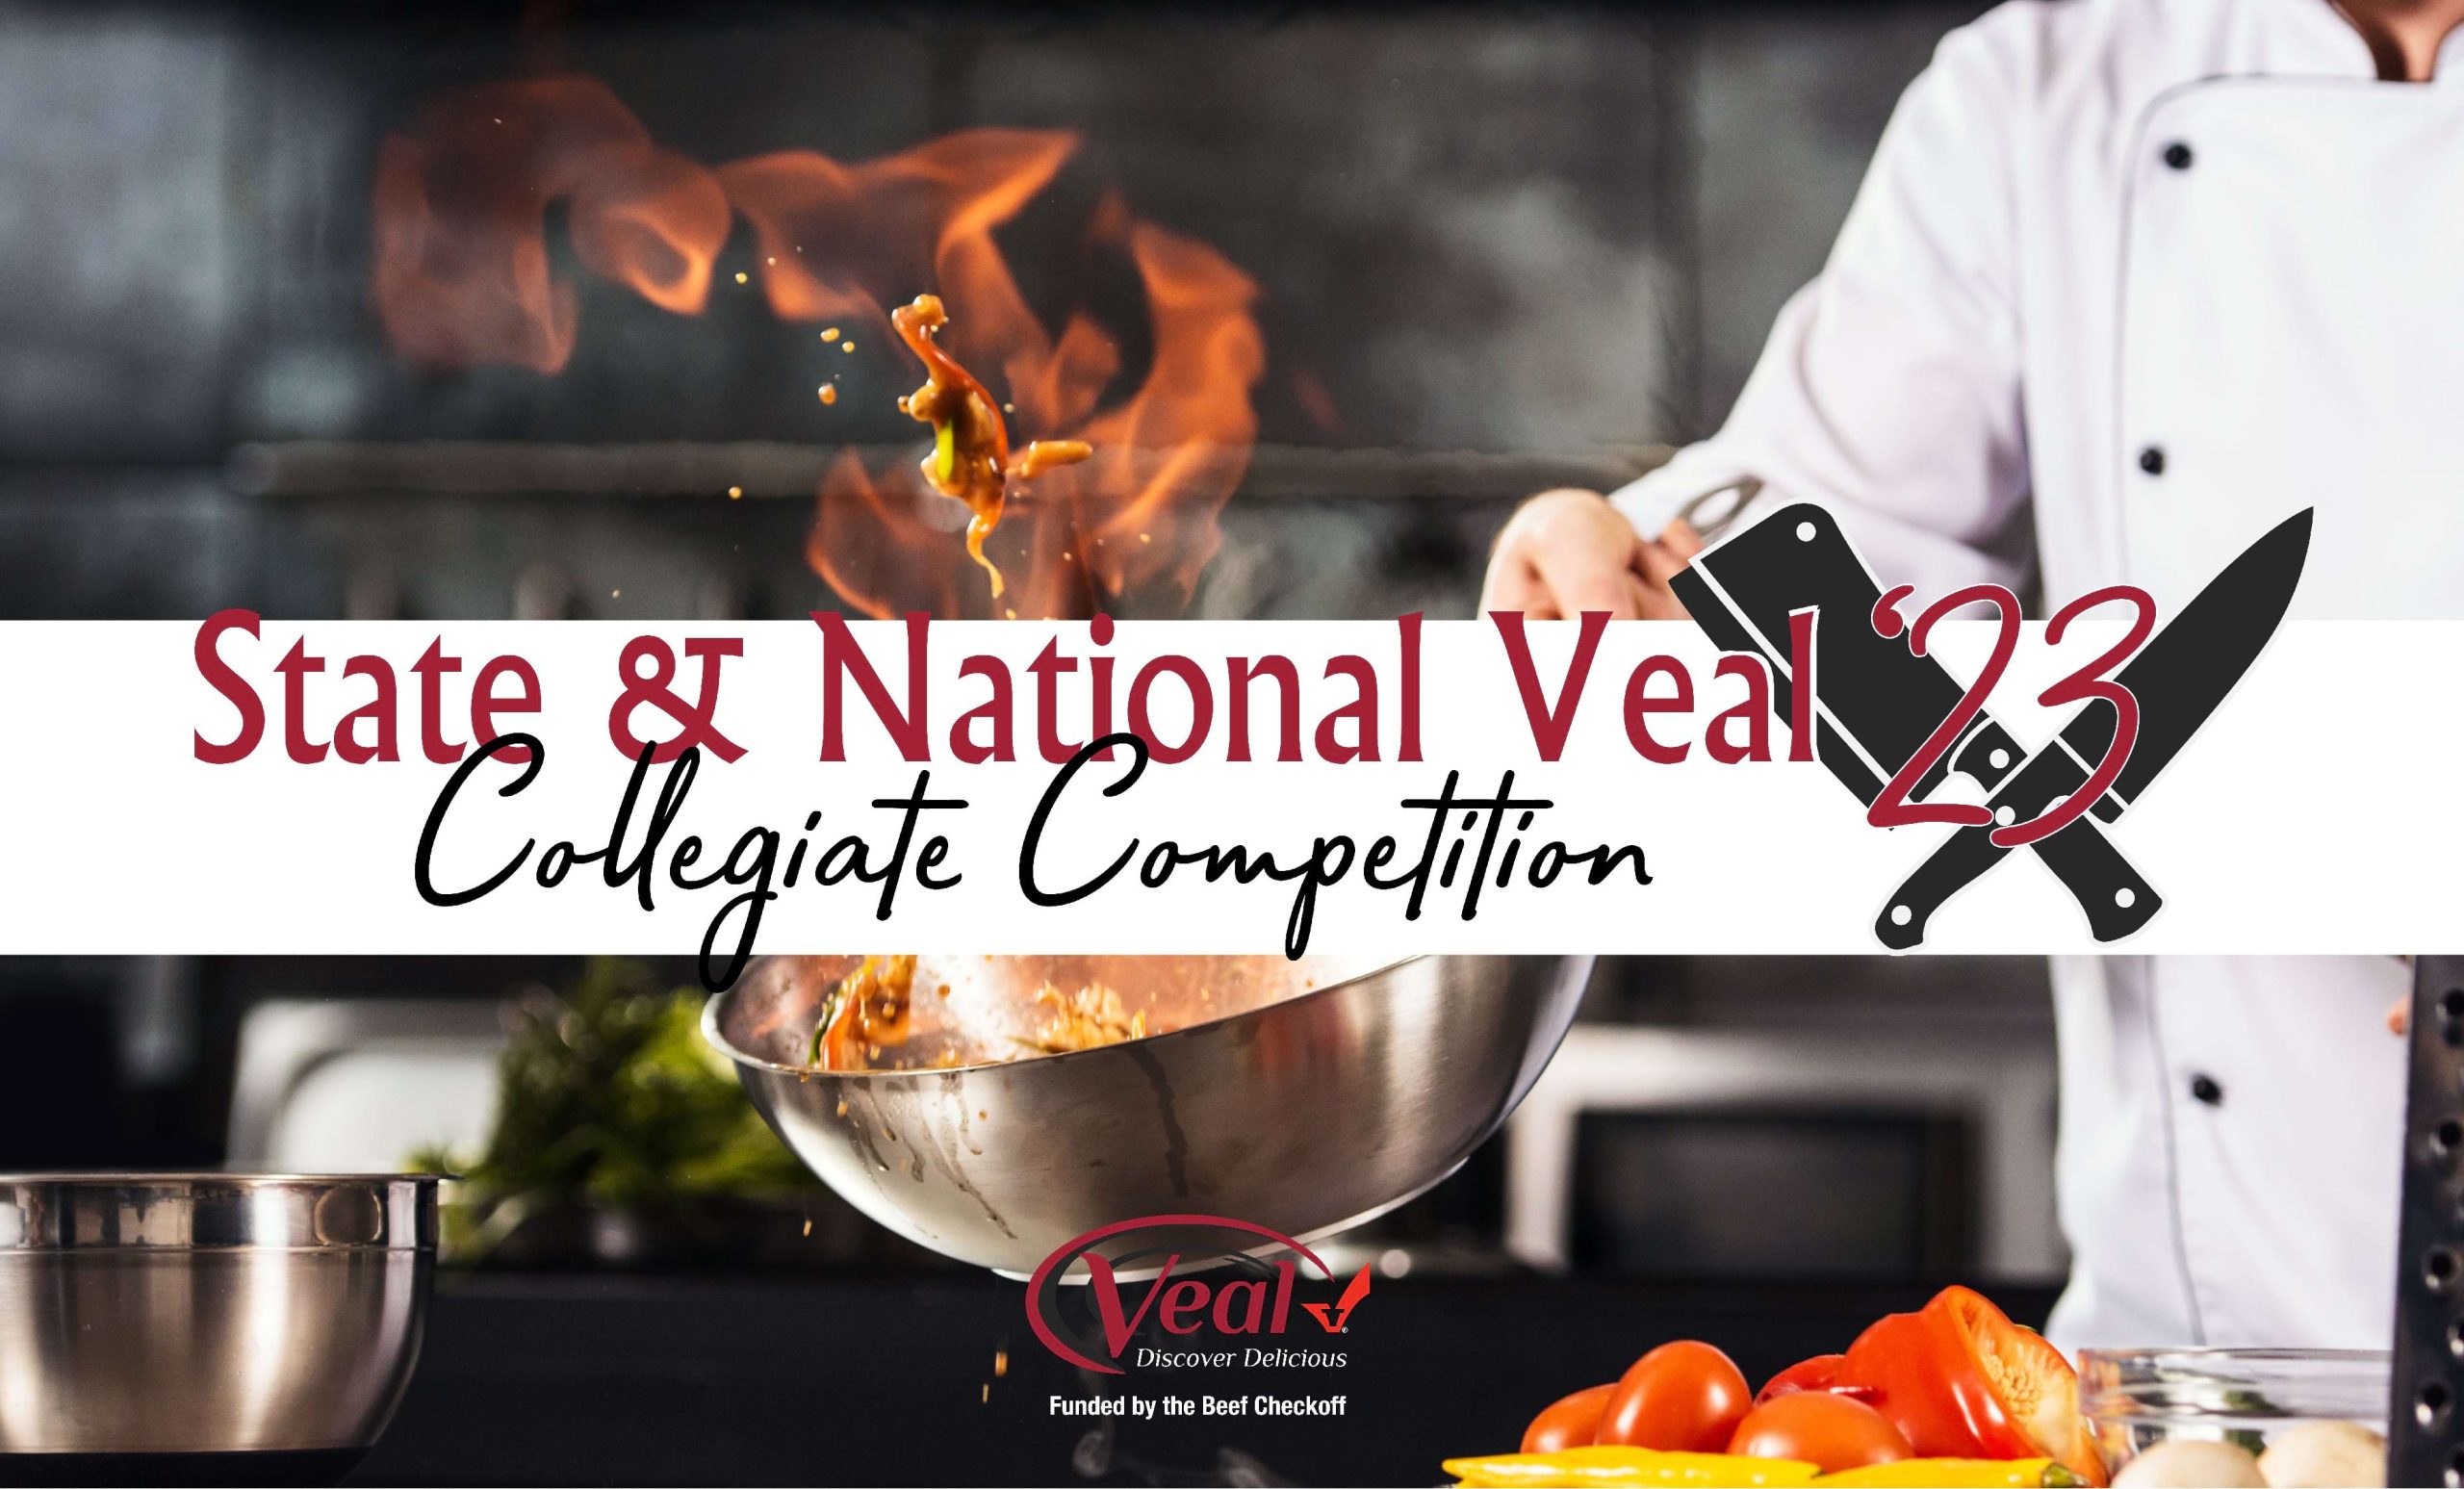 State & National Collegiate Competition